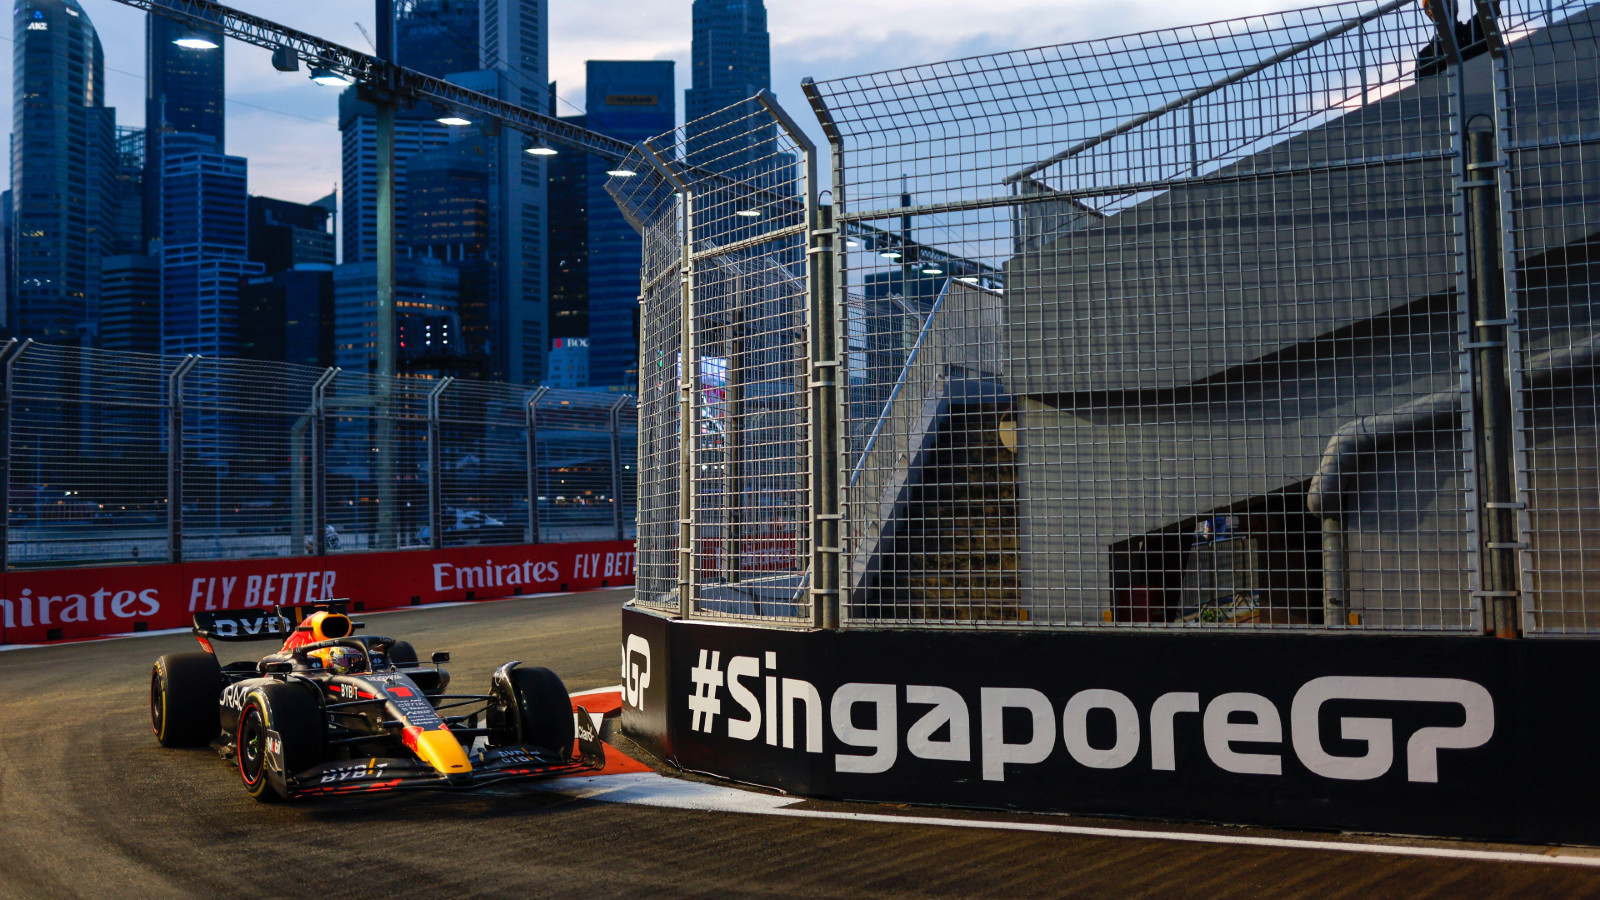 Singapore: Red Bull F1 driver Max Verstappen drives at Marina Bay in 2022.